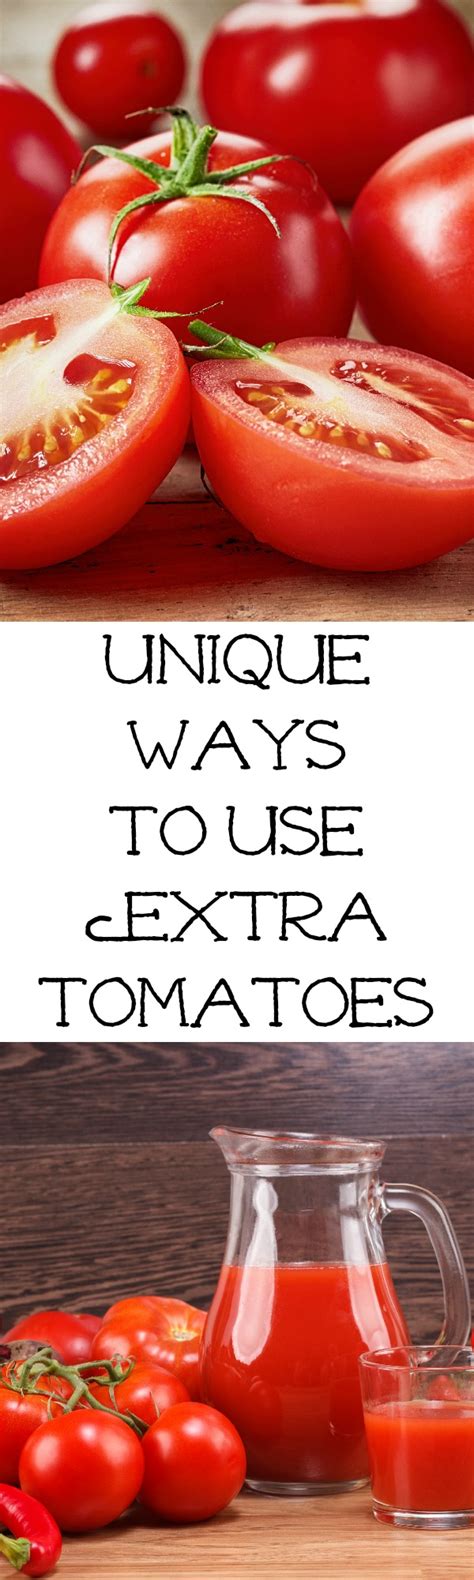 Unique Ways To Use Extra Tomatoes